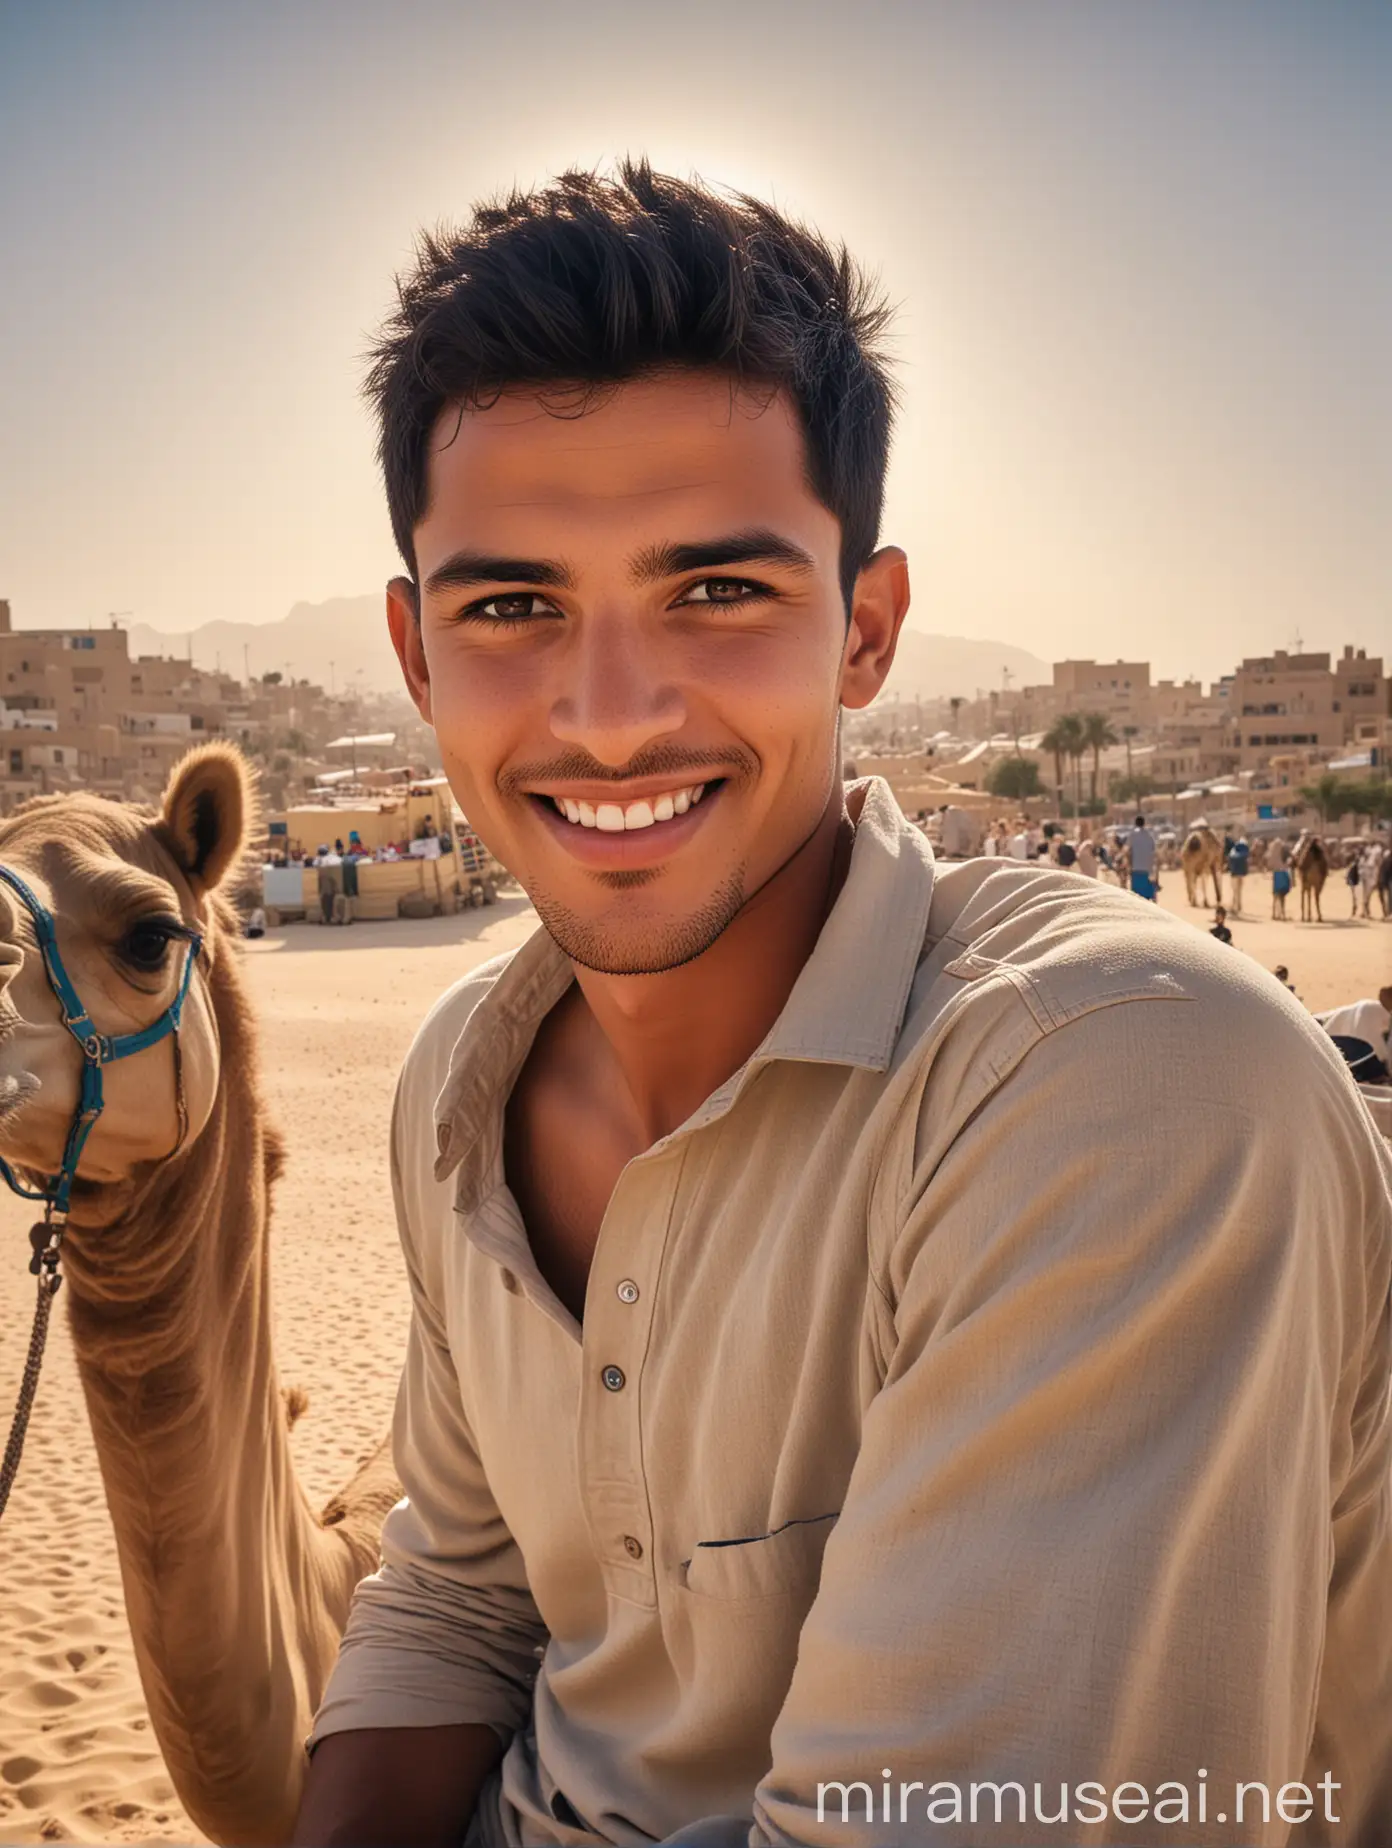 Handsome Young Man Smiling on Camel in Mecca City Egypt Ultra Realistic Portrait